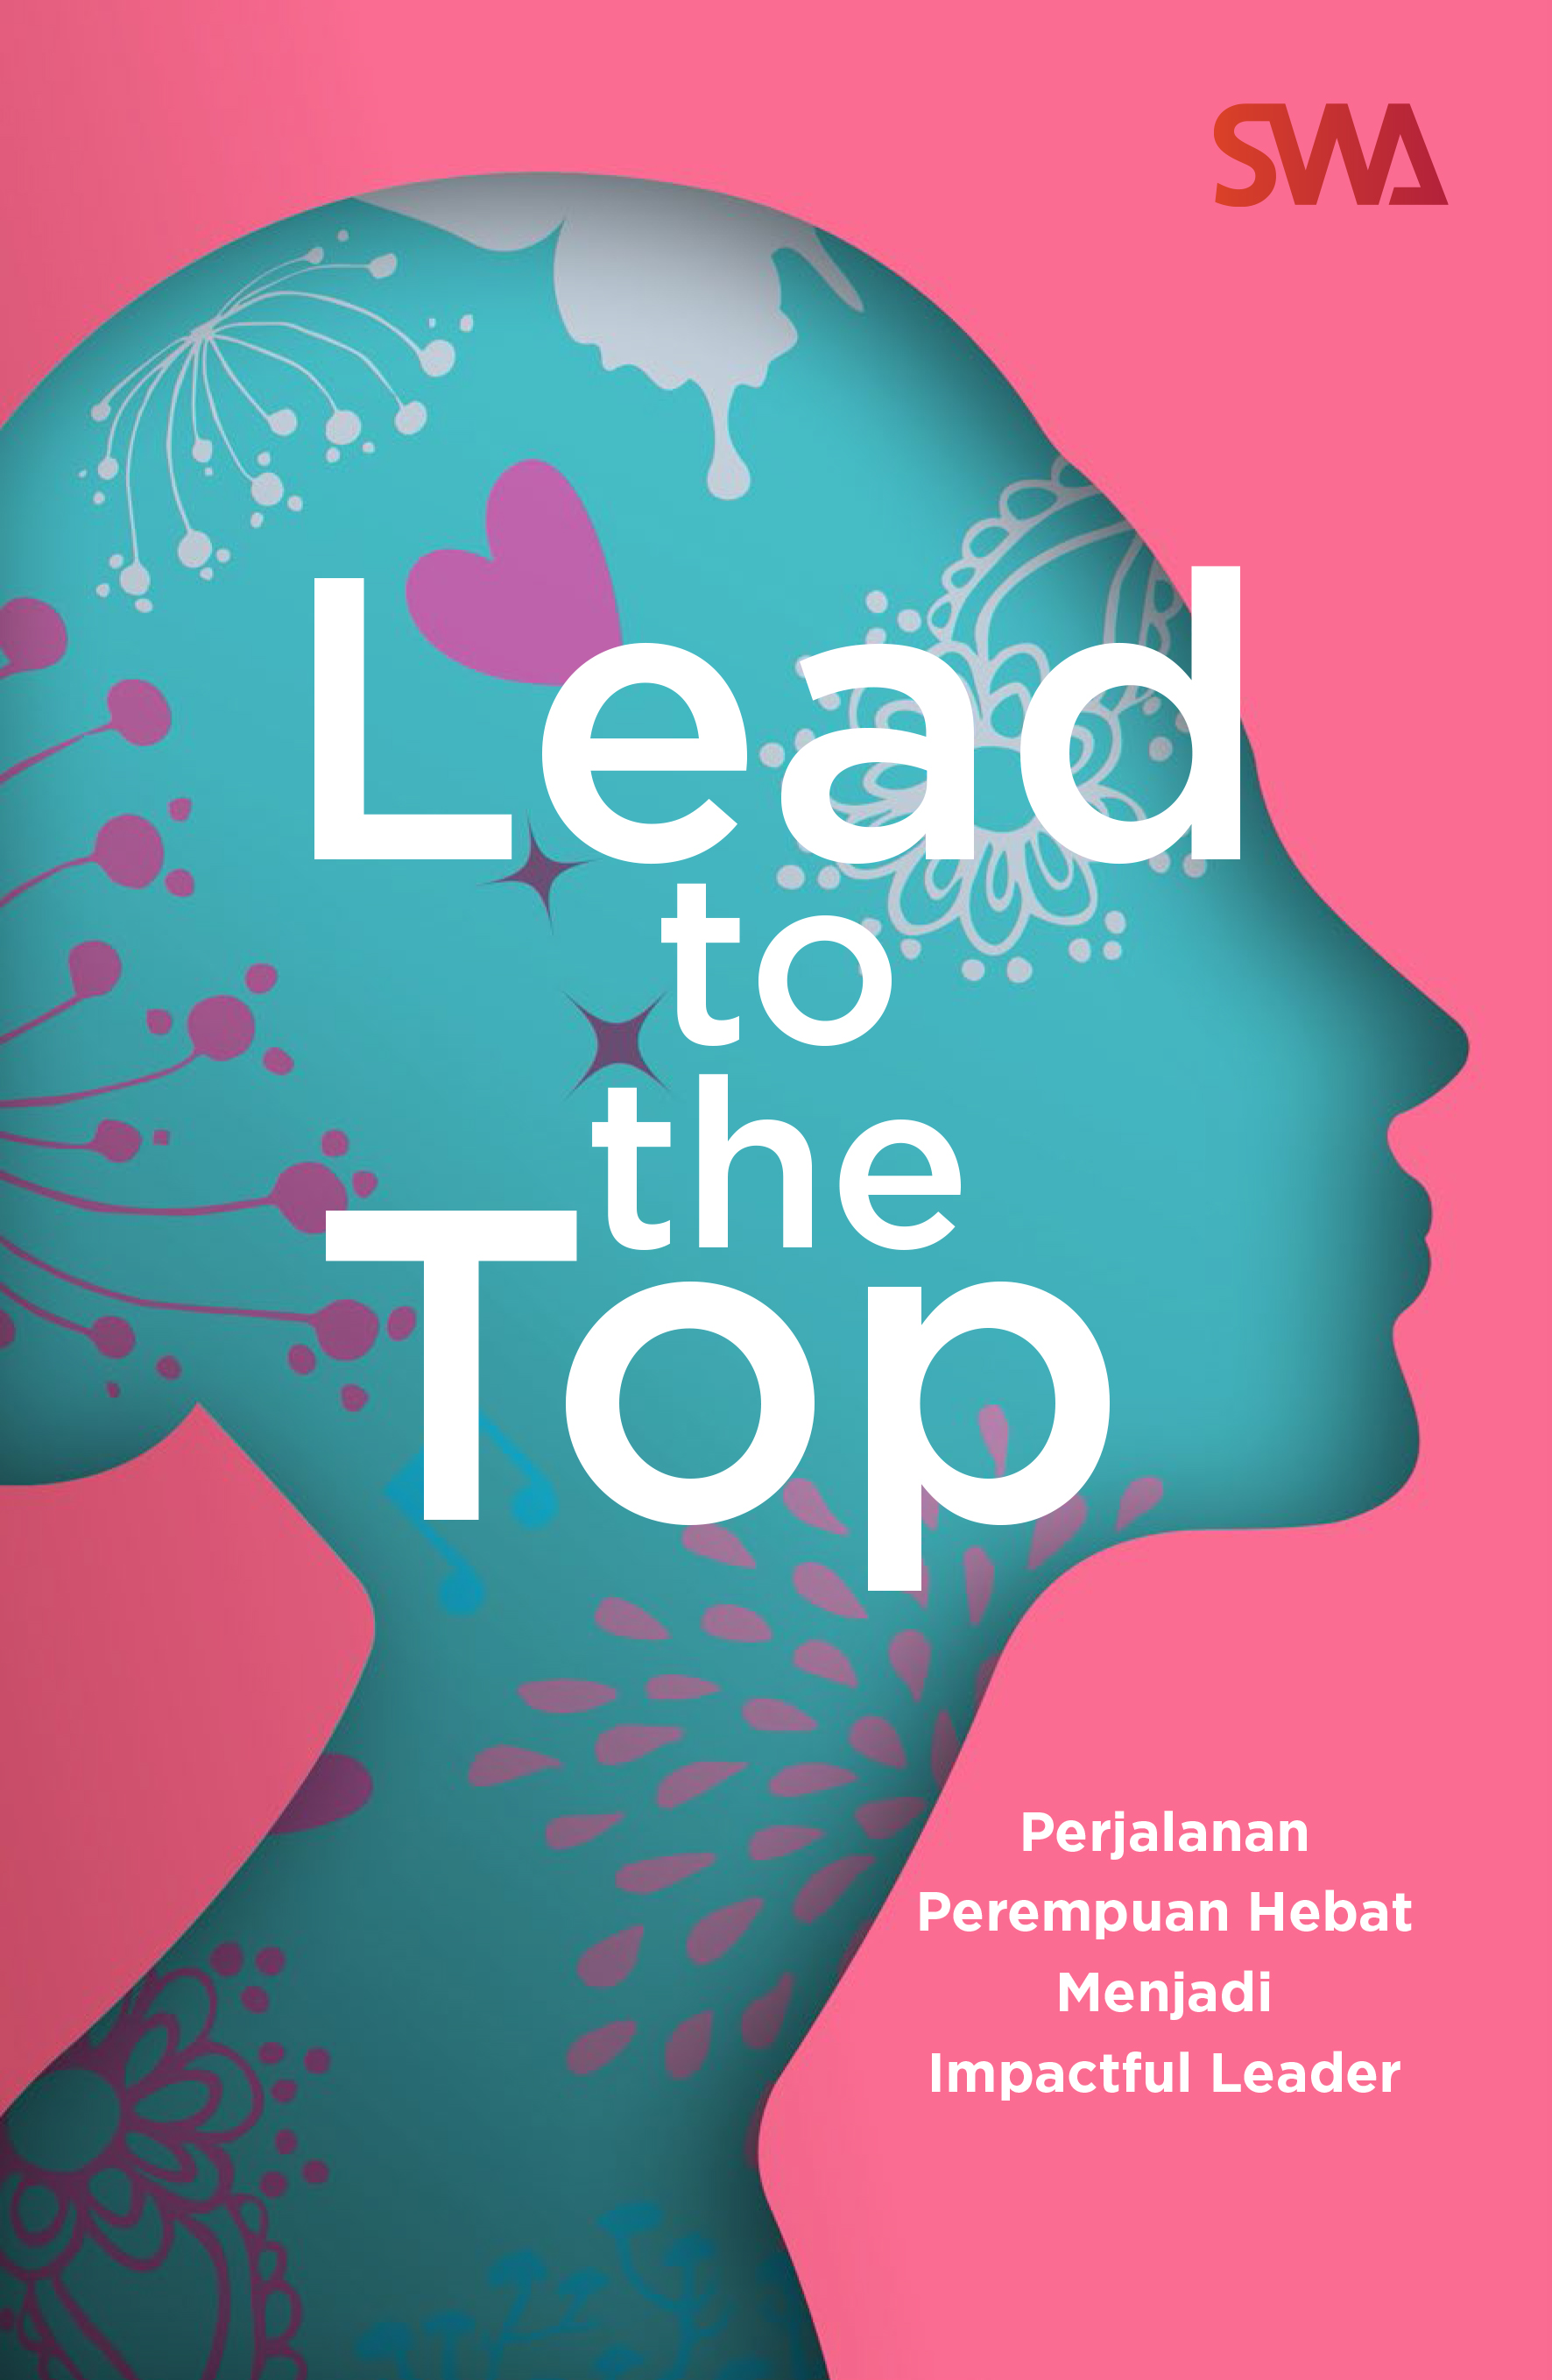 Woman Lead to the Top